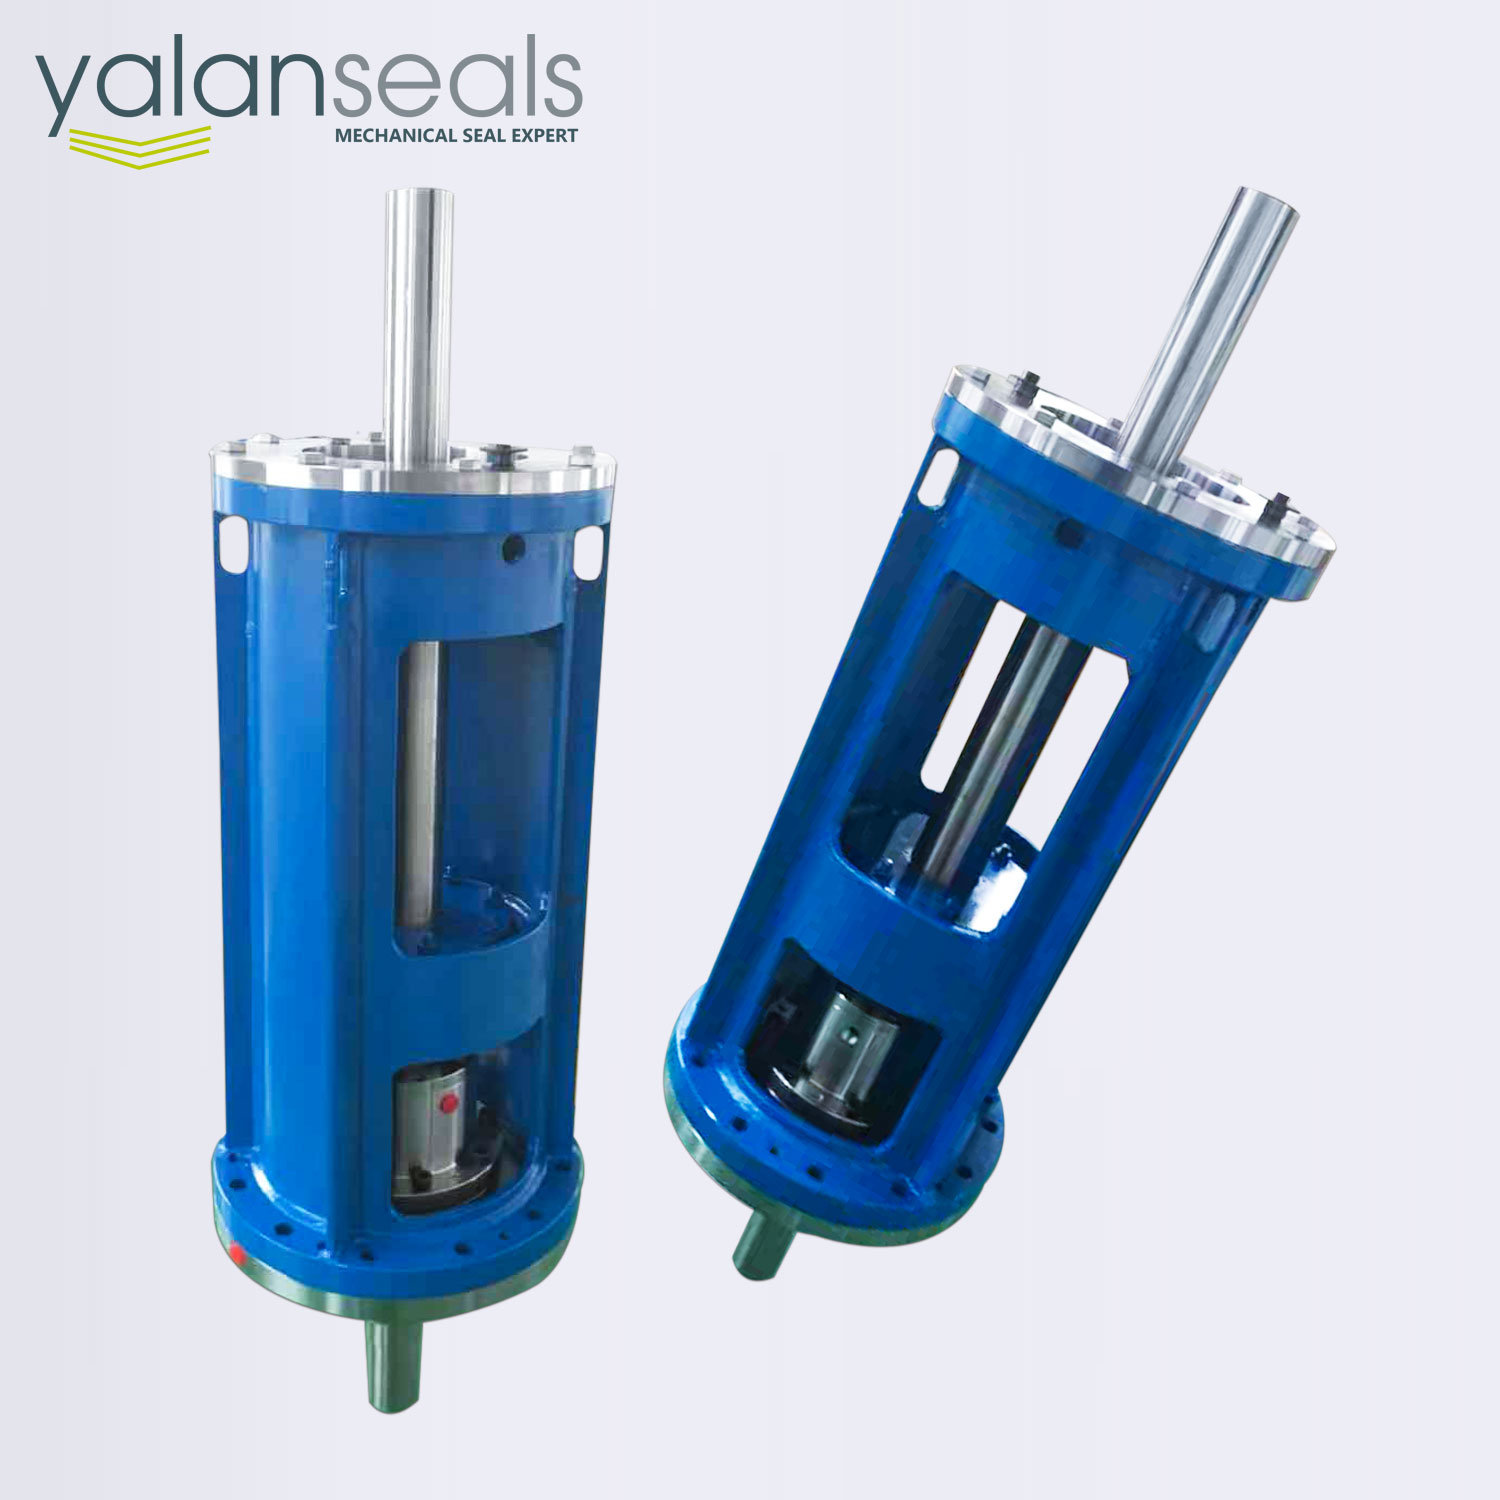 YALAN Cartridge Solution Mechanical Seal Kit for Mixers with Pedestals